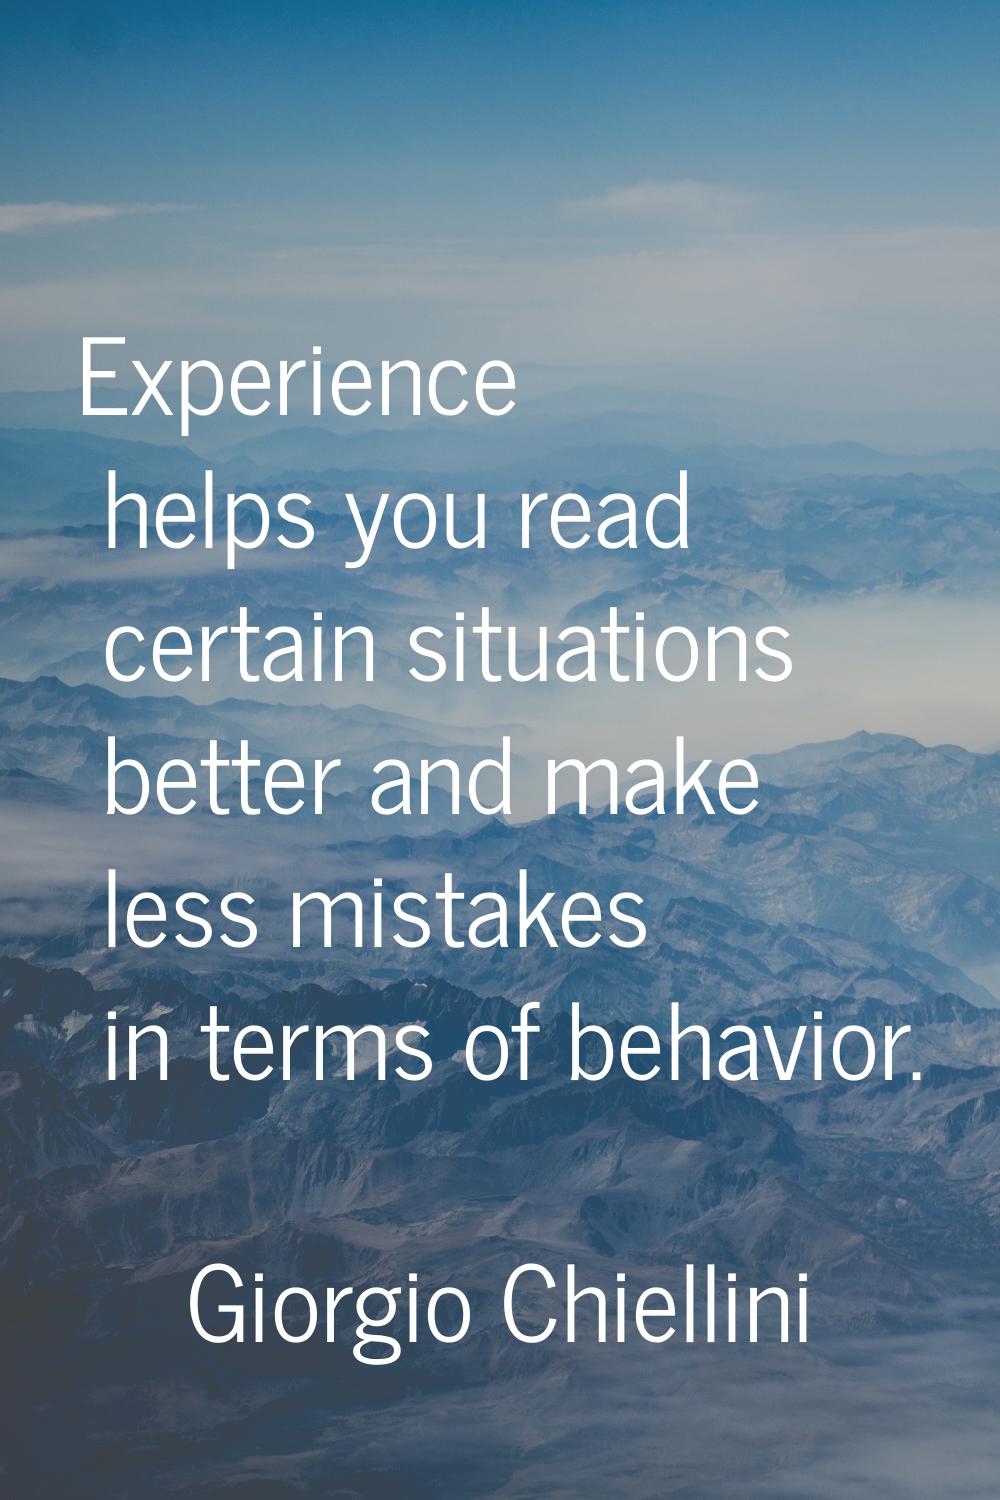 Experience helps you read certain situations better and make less mistakes in terms of behavior.